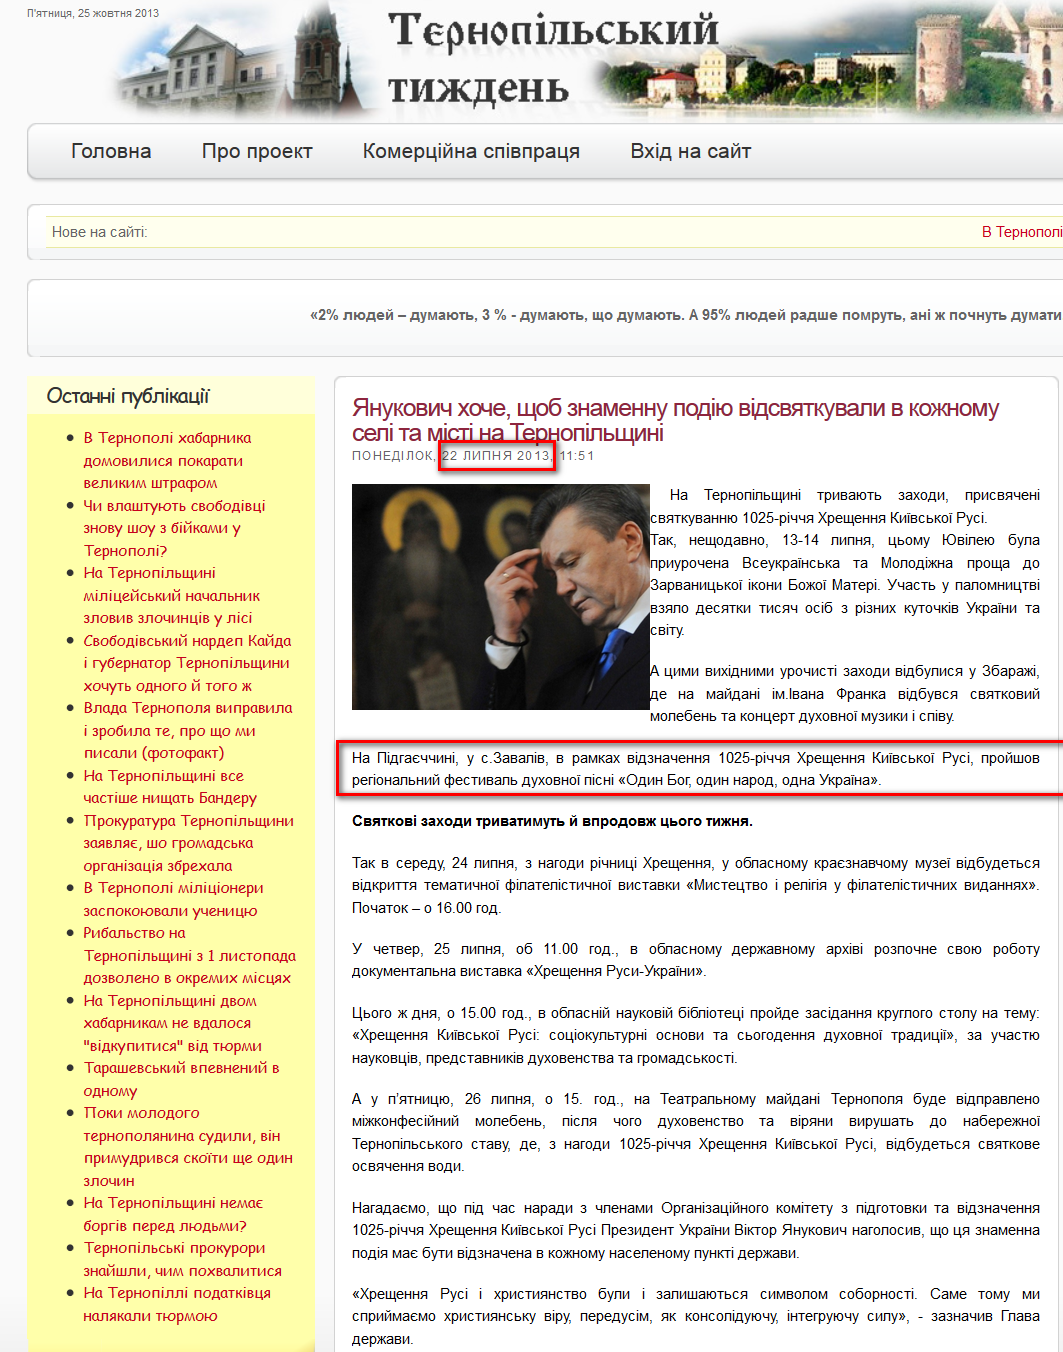 http://t-weekly.org.ua/index.php?option=com_content&view=article&id=9277:2013-07-22-07-55-14&catid=1:2011-01-24-17-17-54&Itemid=2